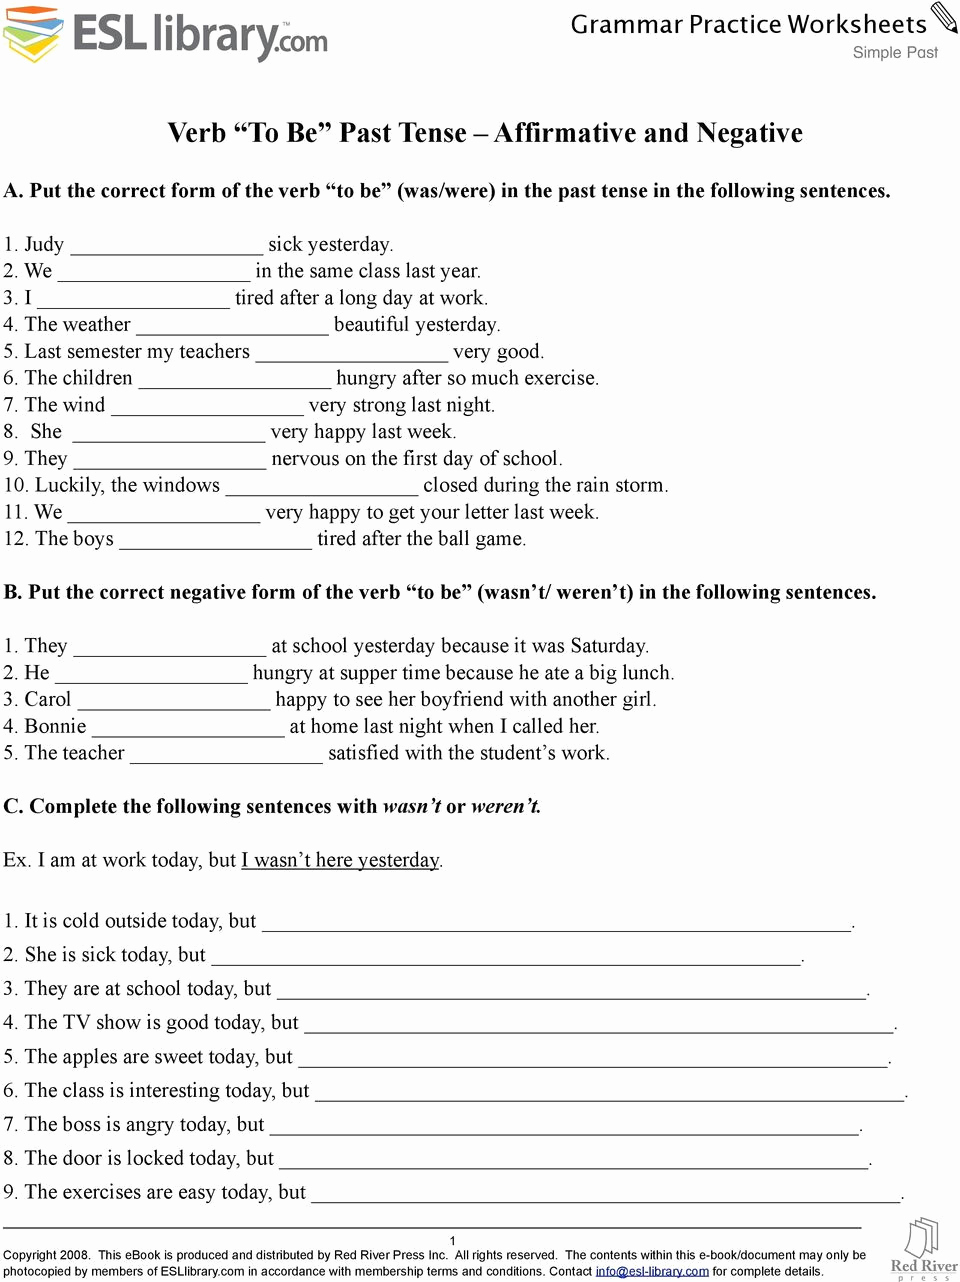 Verbs Worksheets for Middle School Inspirational 20 Verb Tense Worksheets Middle School